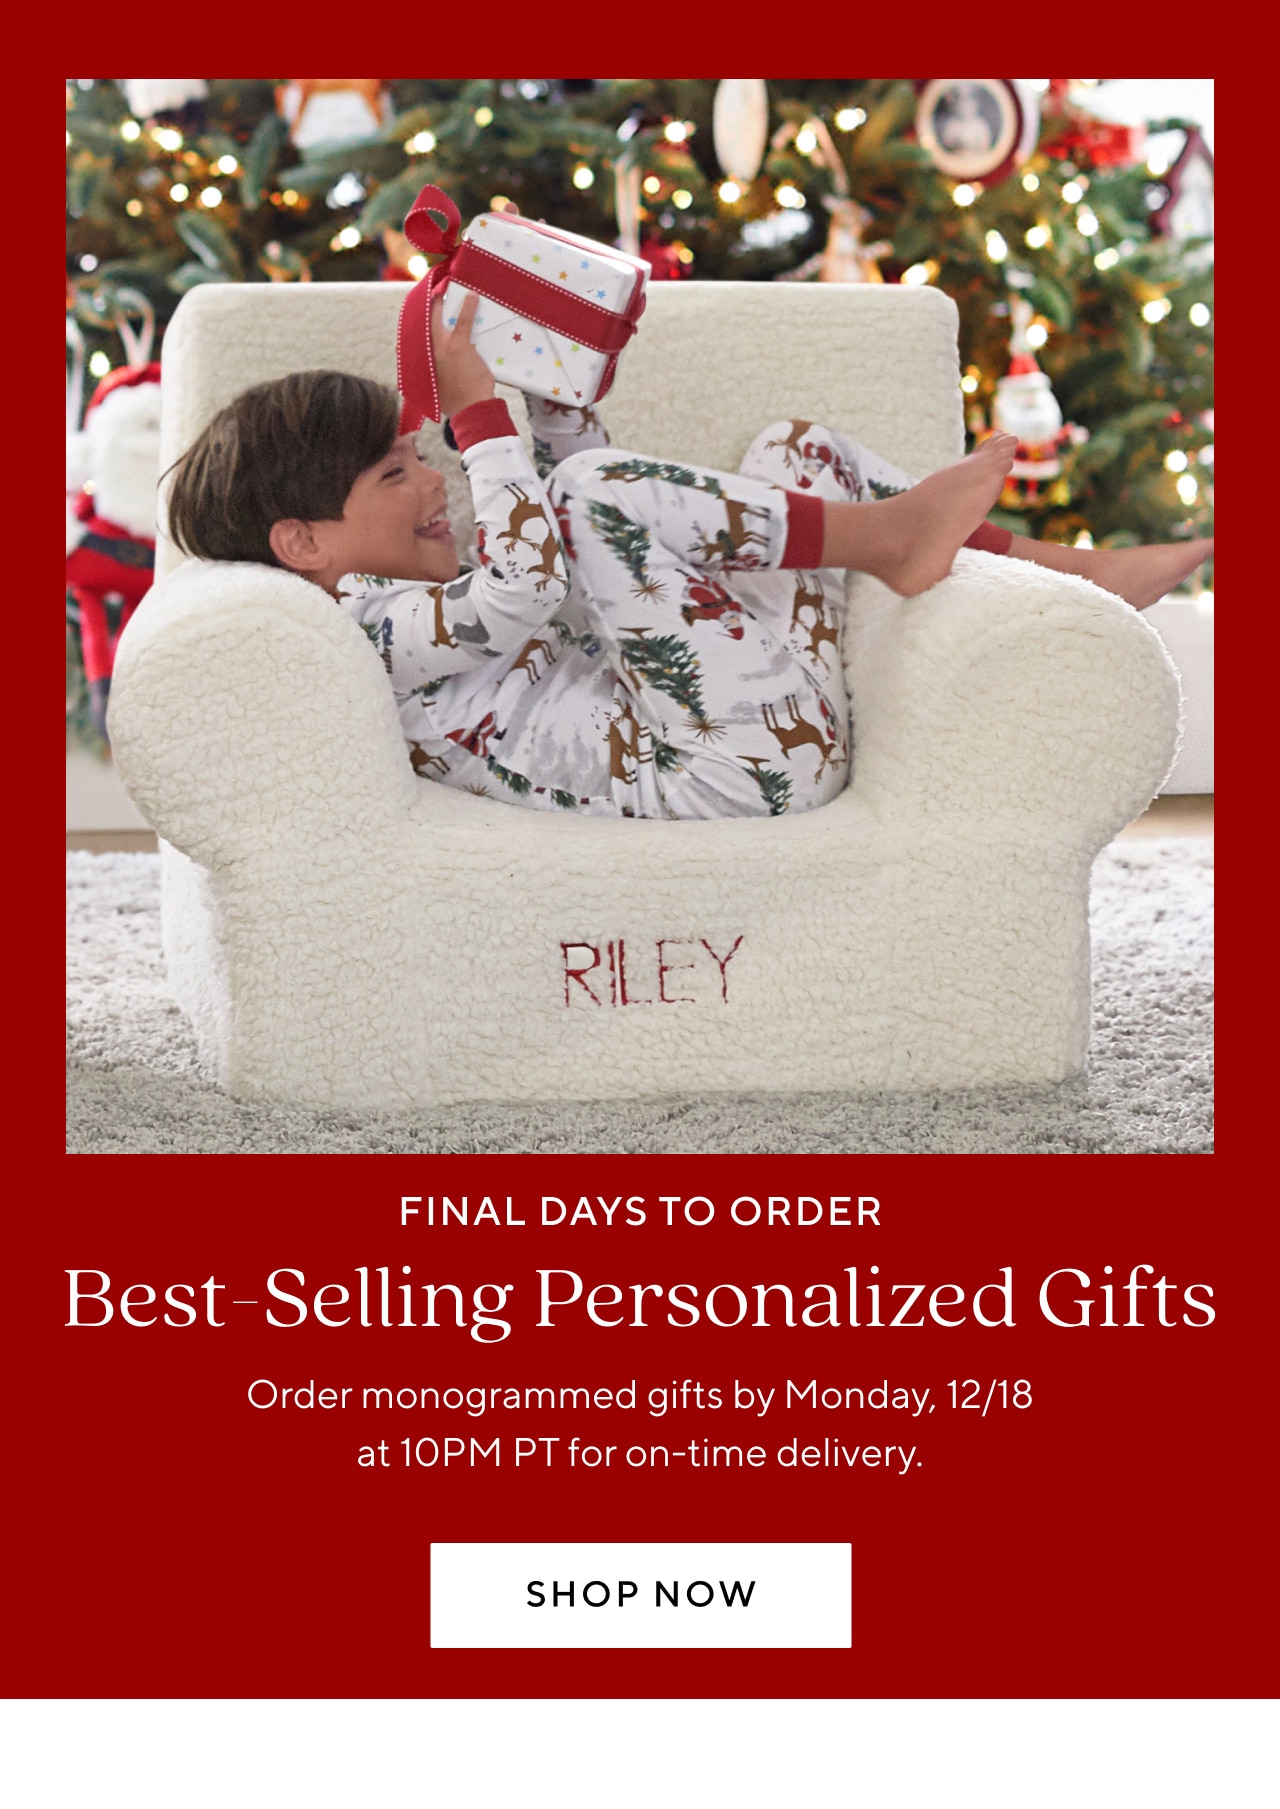 BEST SELLING PERSONALIED GIFTS